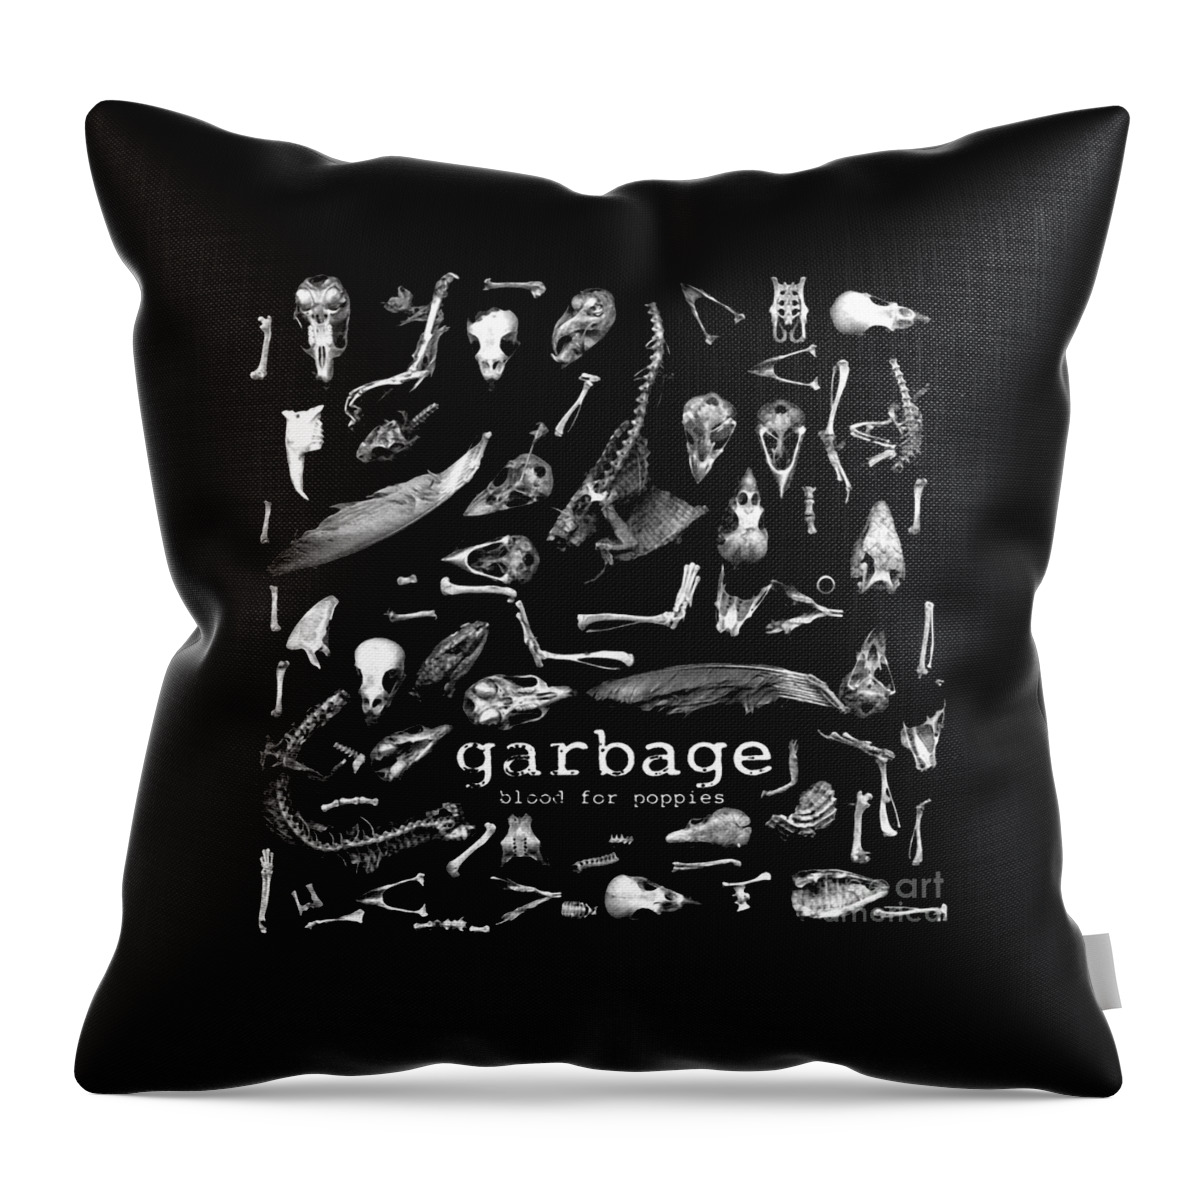 Music Throw Pillow featuring the digital art Garbage Band by Gera Catur